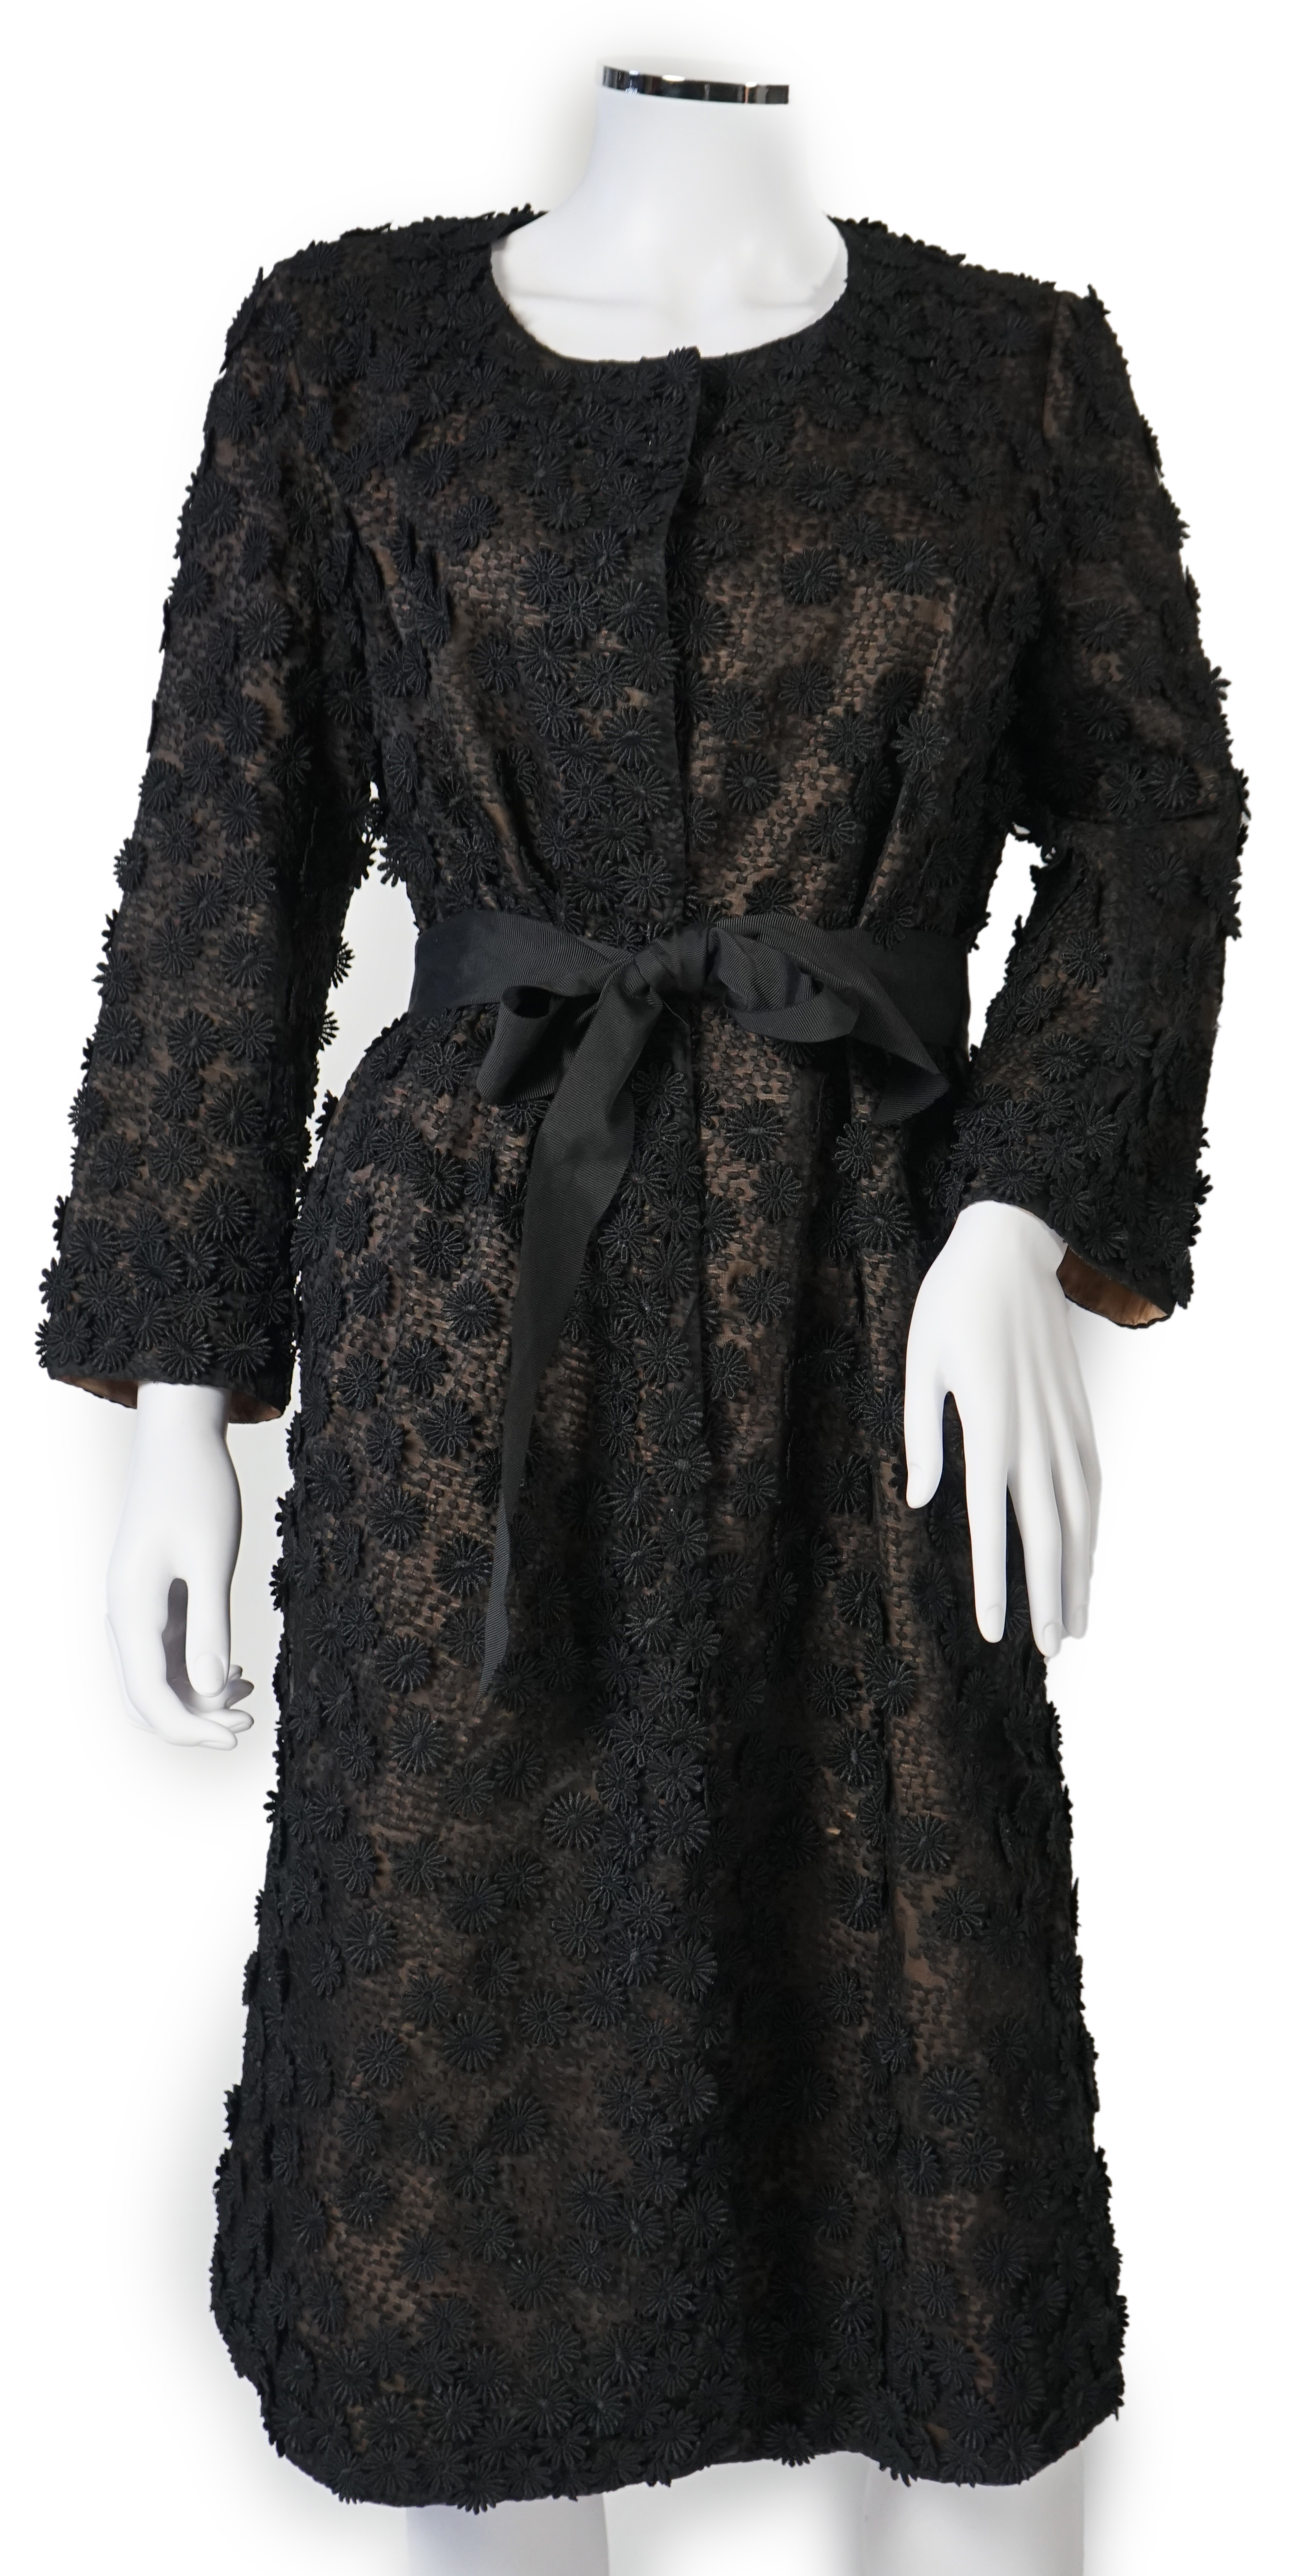 A Nicole Farhi lady's black lace knee length jacket with flower embellishment all over with black ribbon tie belt, size 12